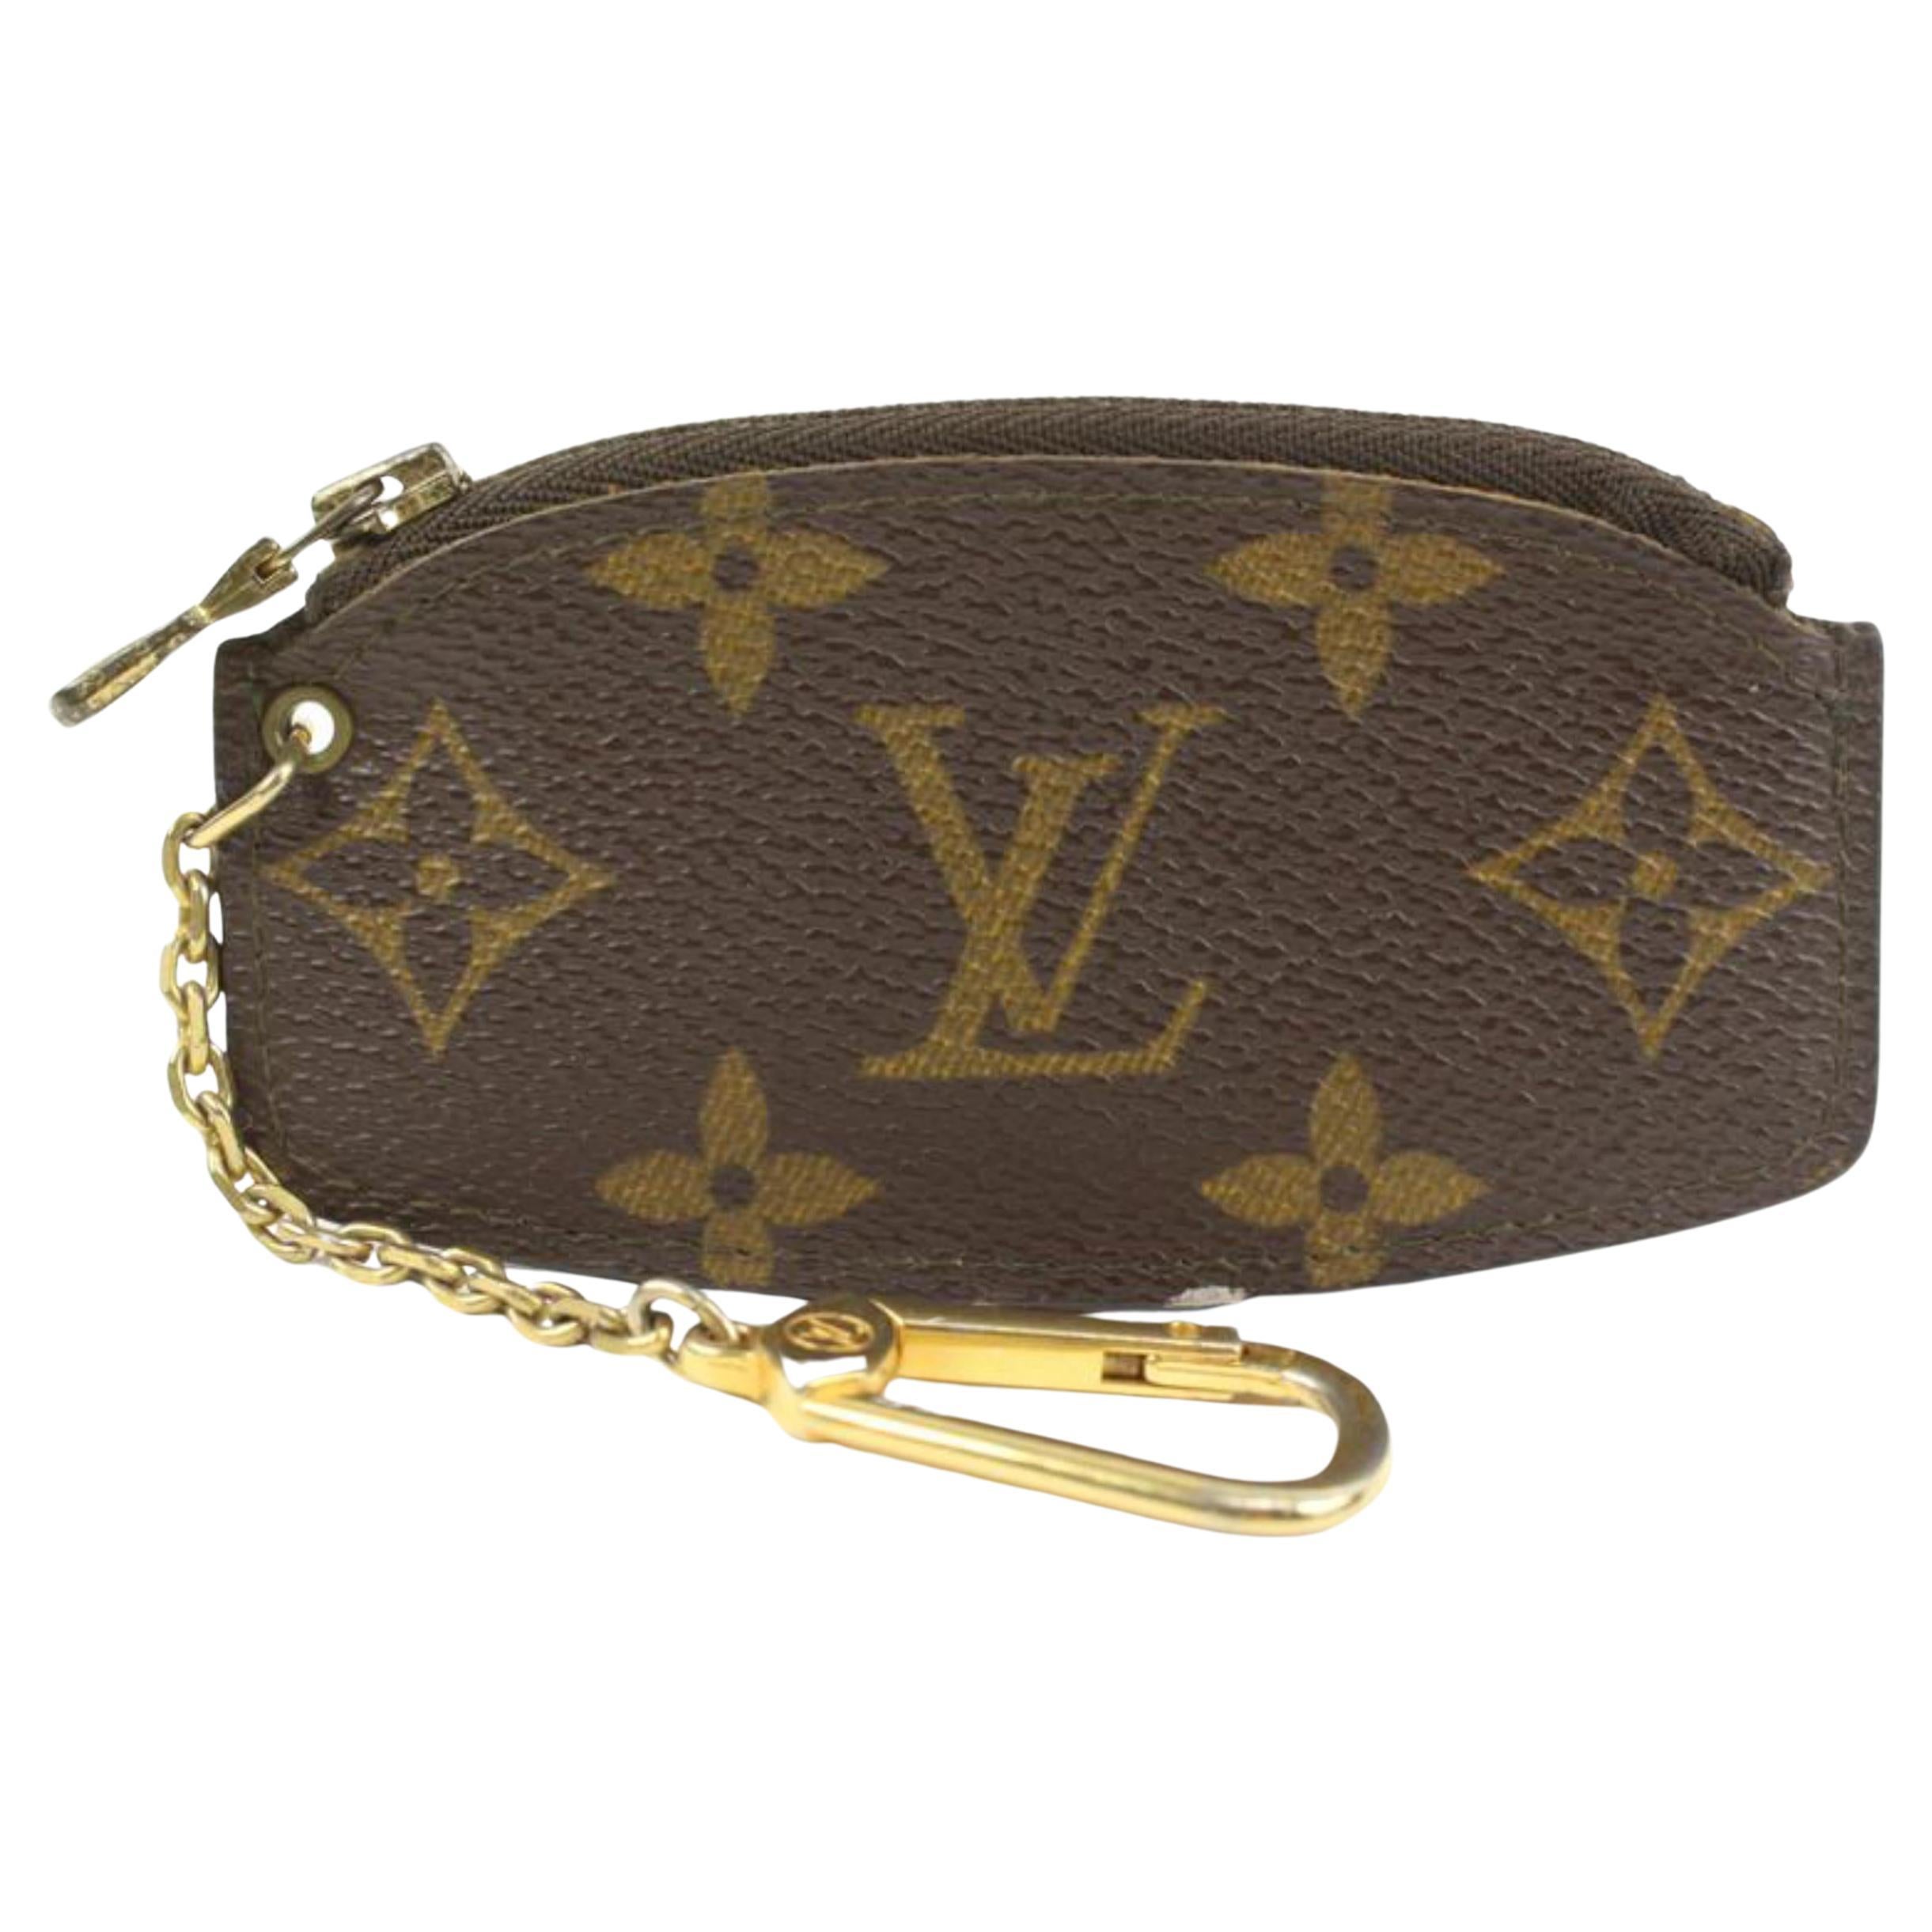 Classic Louis Vuitton Iconic Monogram Cell Phone Case or Holder